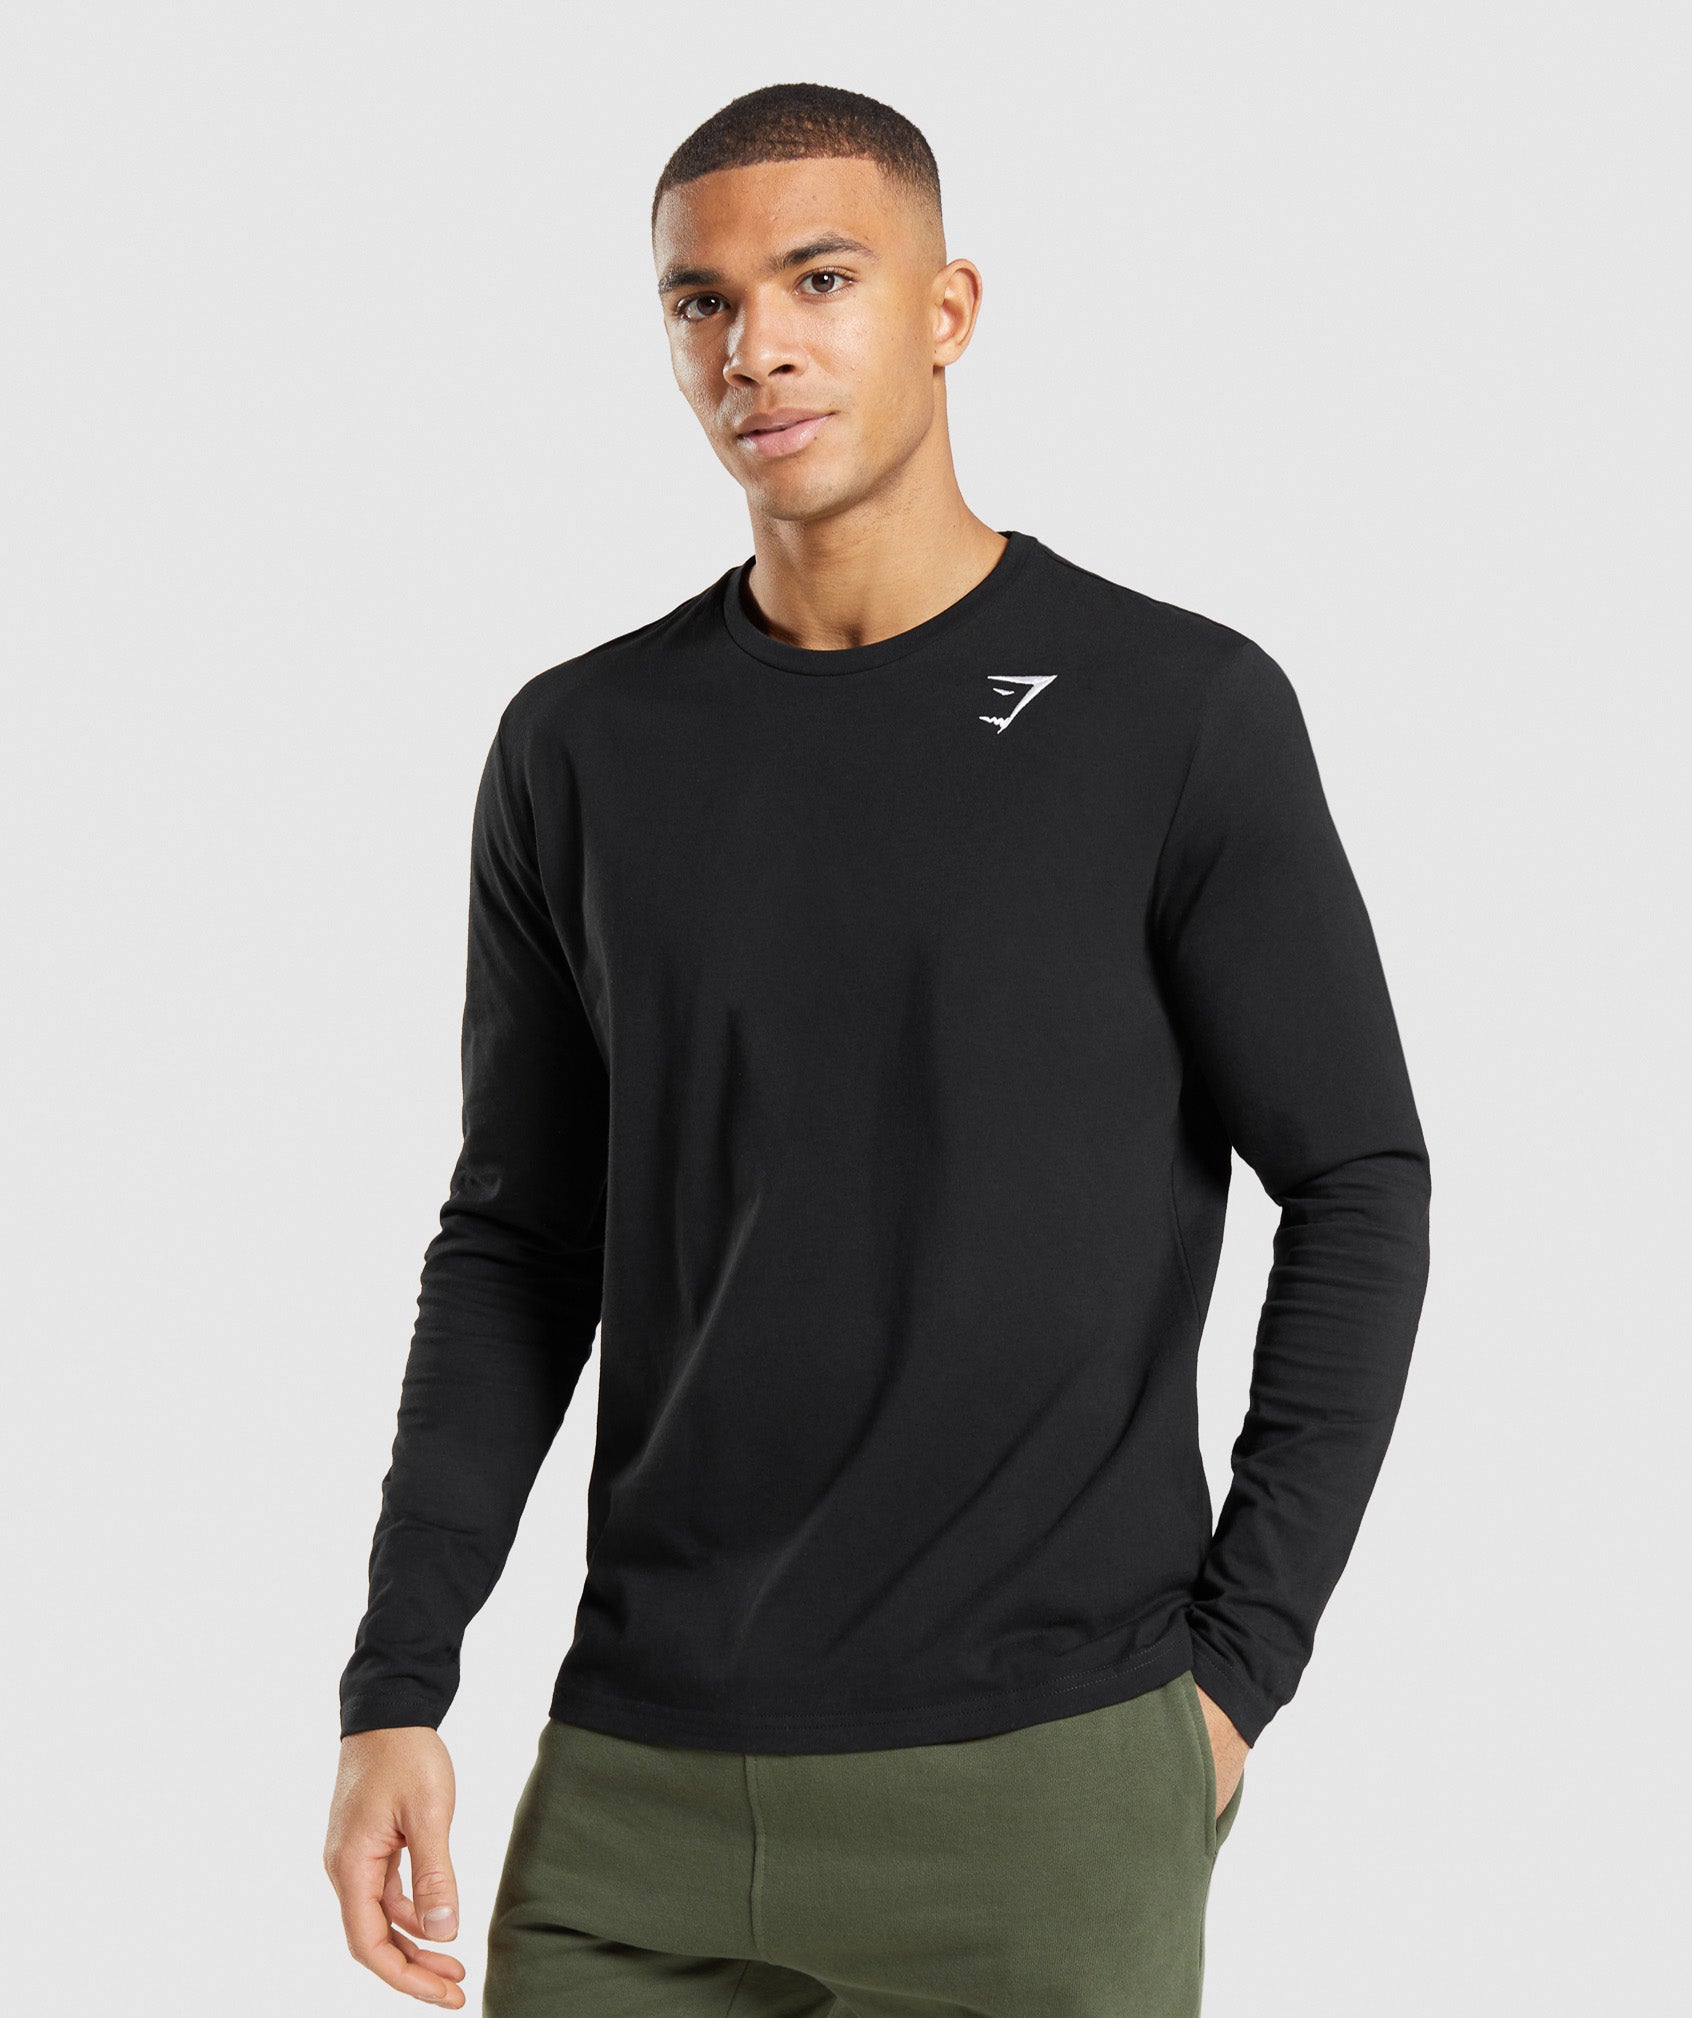 Gymshark Onyx Seamless Hooded Top - Charcoal  Mens workout clothes, Men  stylish dress, Cool t shirts